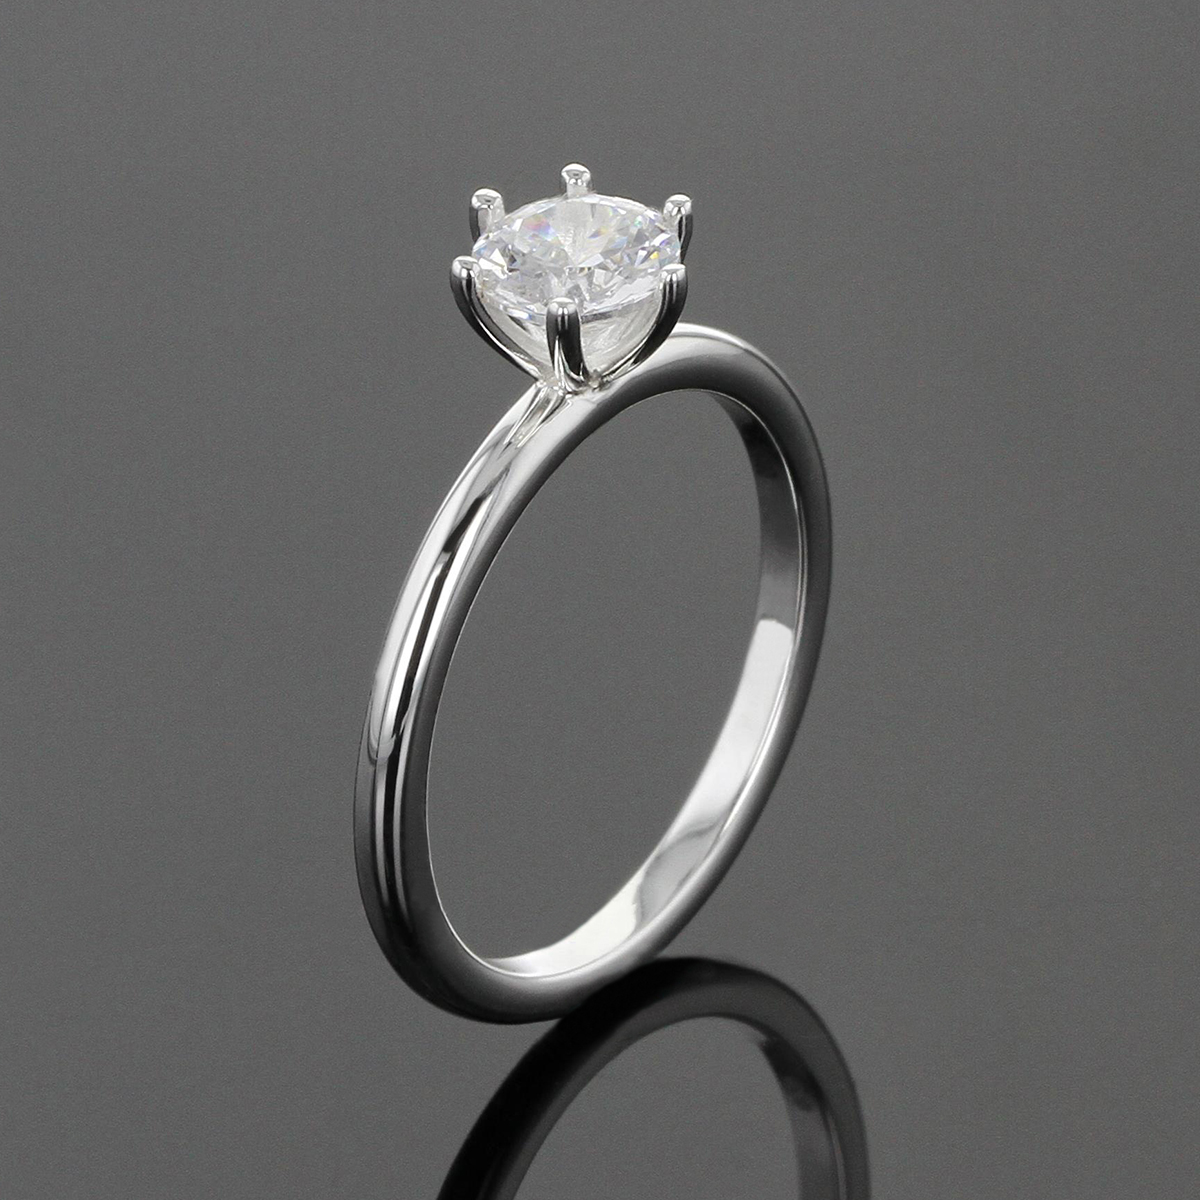 Polished sterling silver zirconia ring